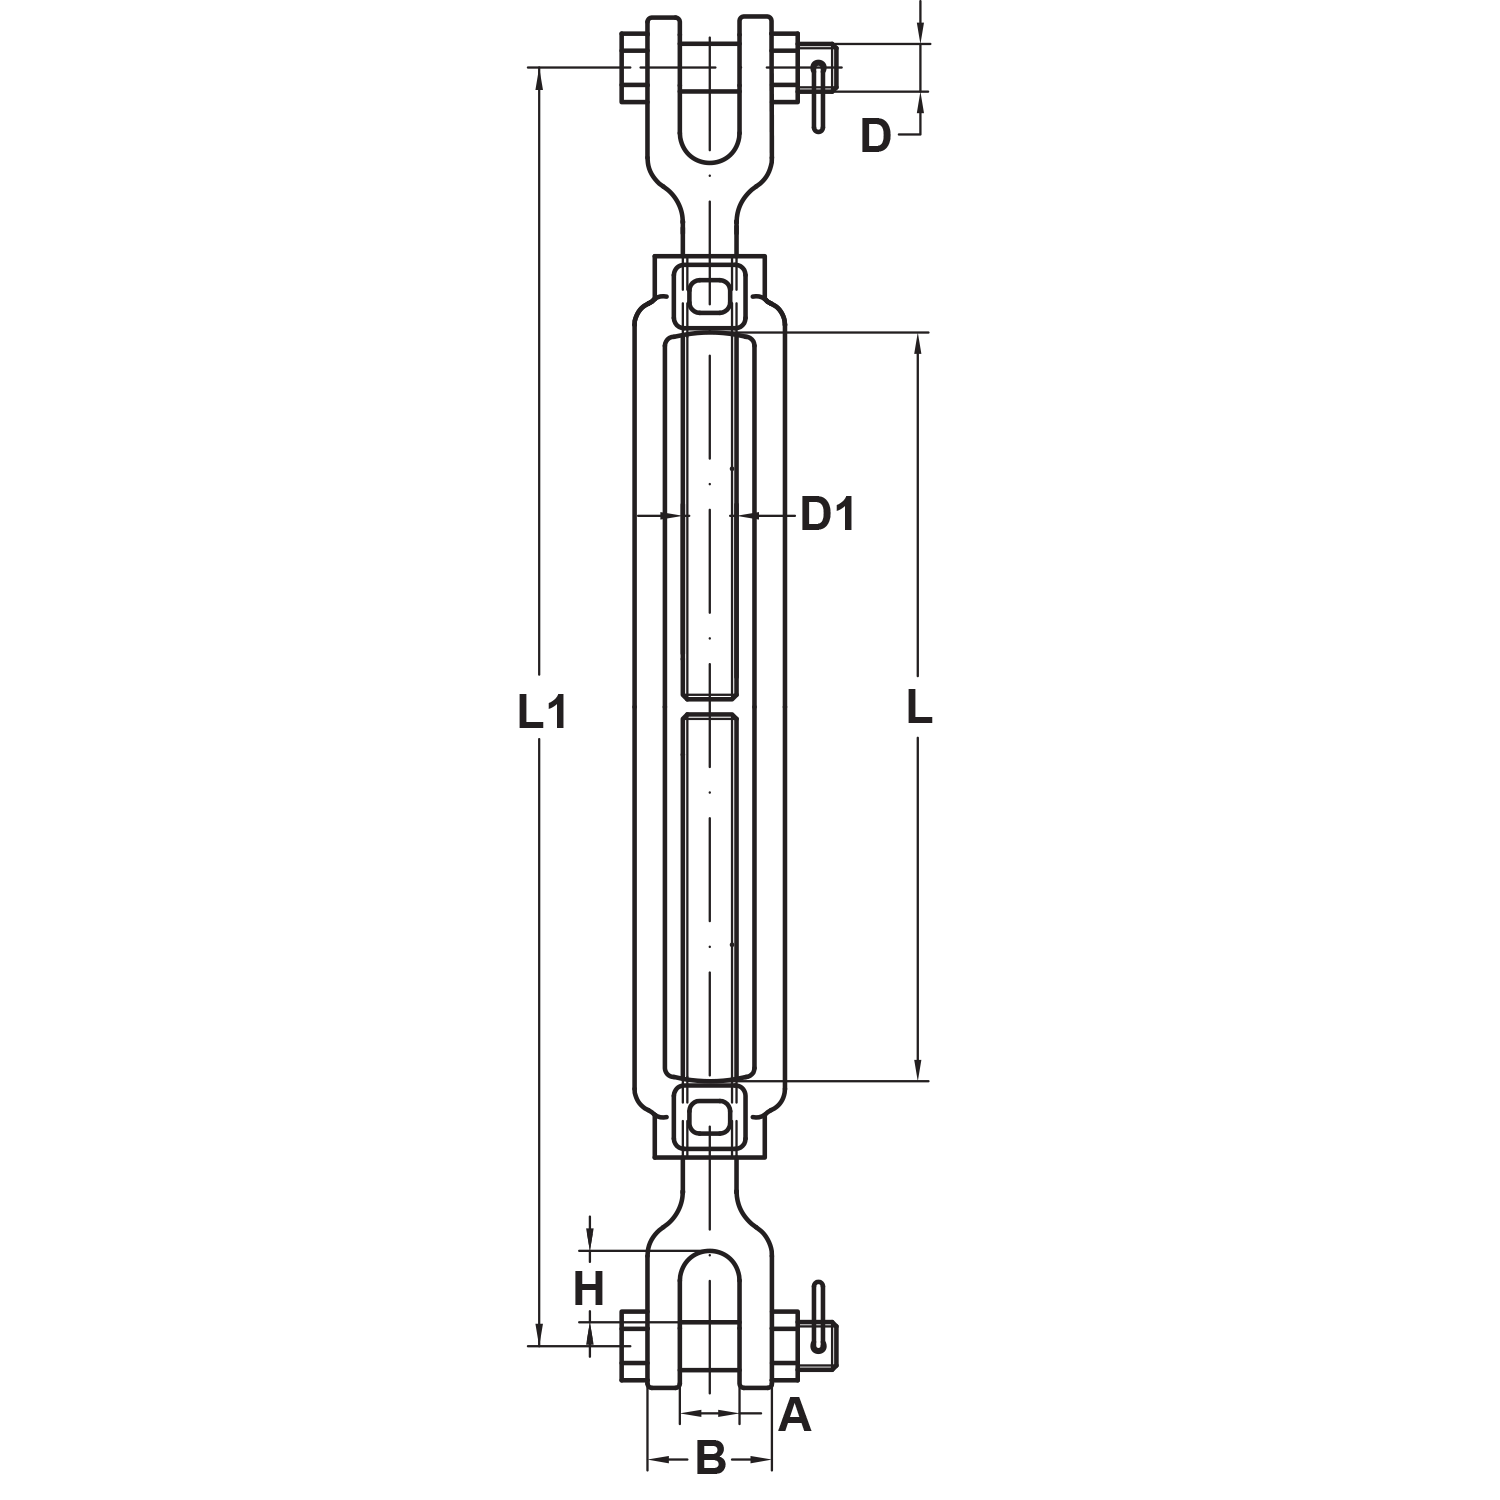 3-8-x-6-stainless-steel-jaw-jaw-turnbuckle-us-type-diagram